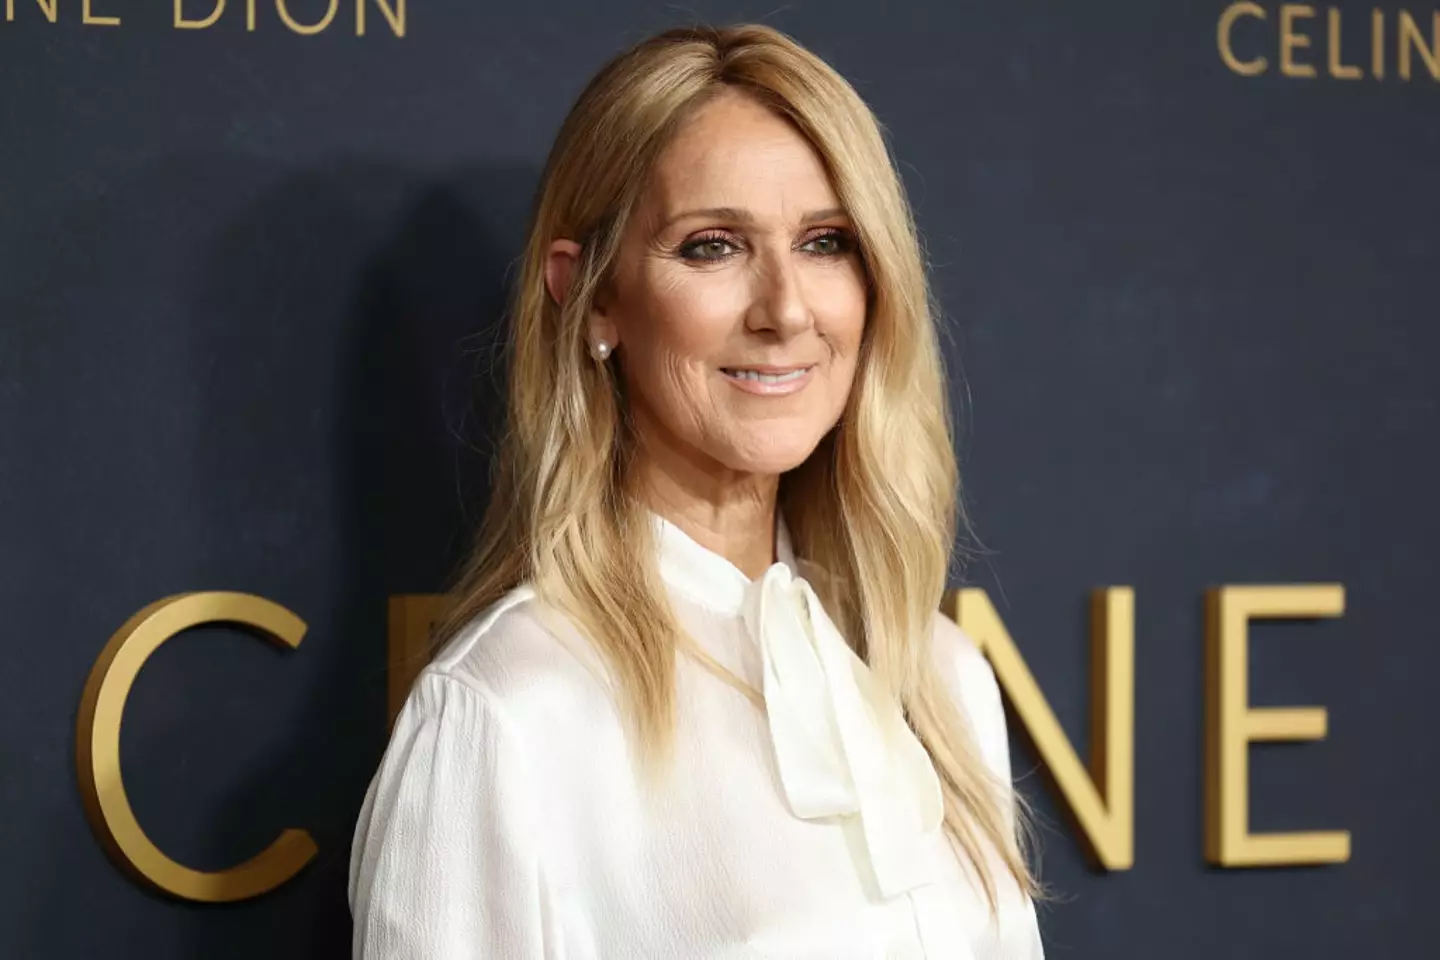 Céline Dion has been open with fans about her devastating condition. (Cindy Ord/Getty Images)